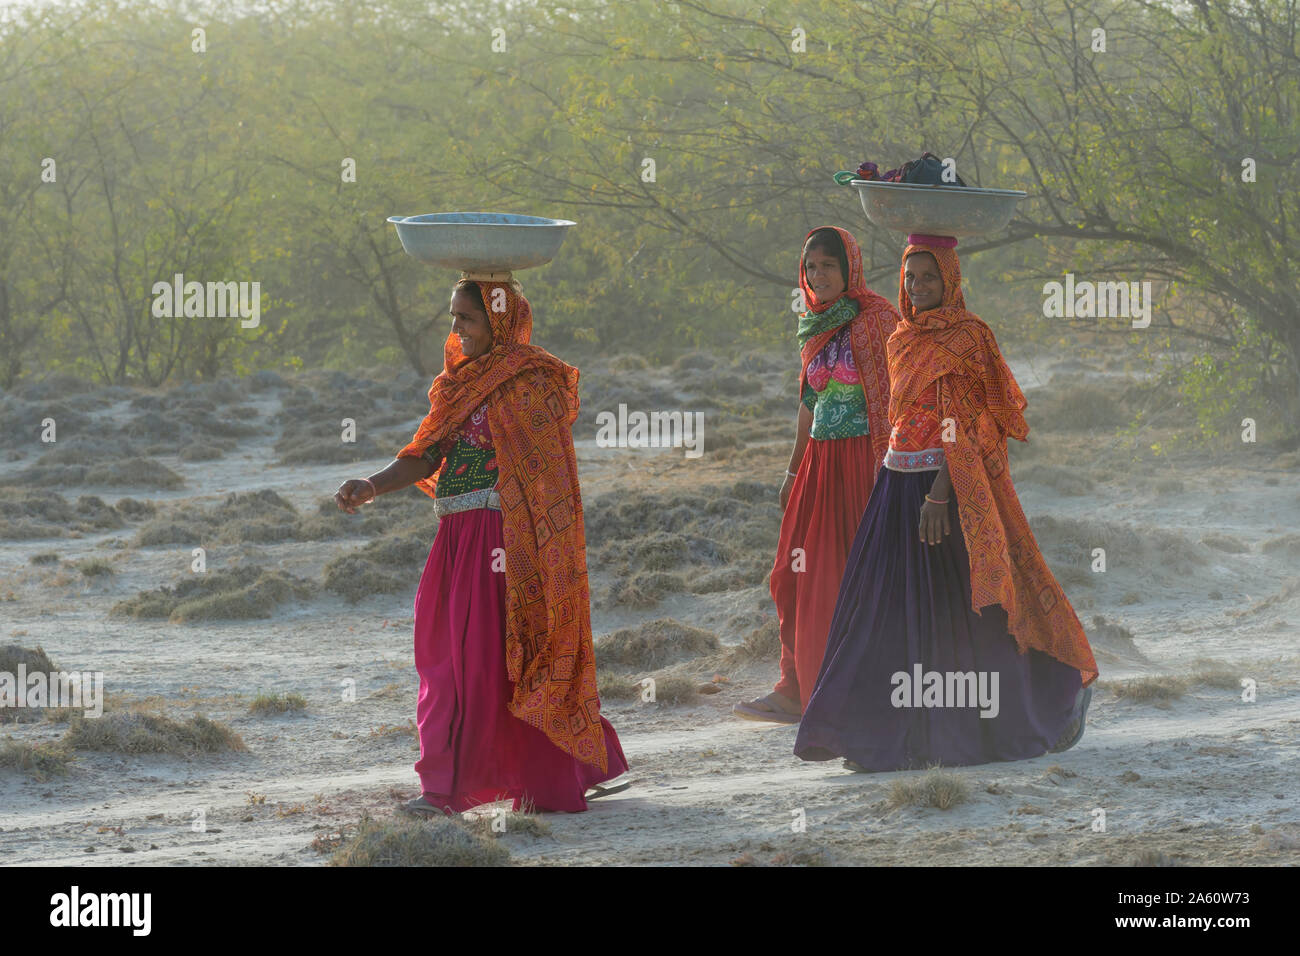 Fakirani women in traditional clothes walking in the desert with basins on their heads, Great Rann of Kutch Desert, Gujarat, India, Asia Stock Photo